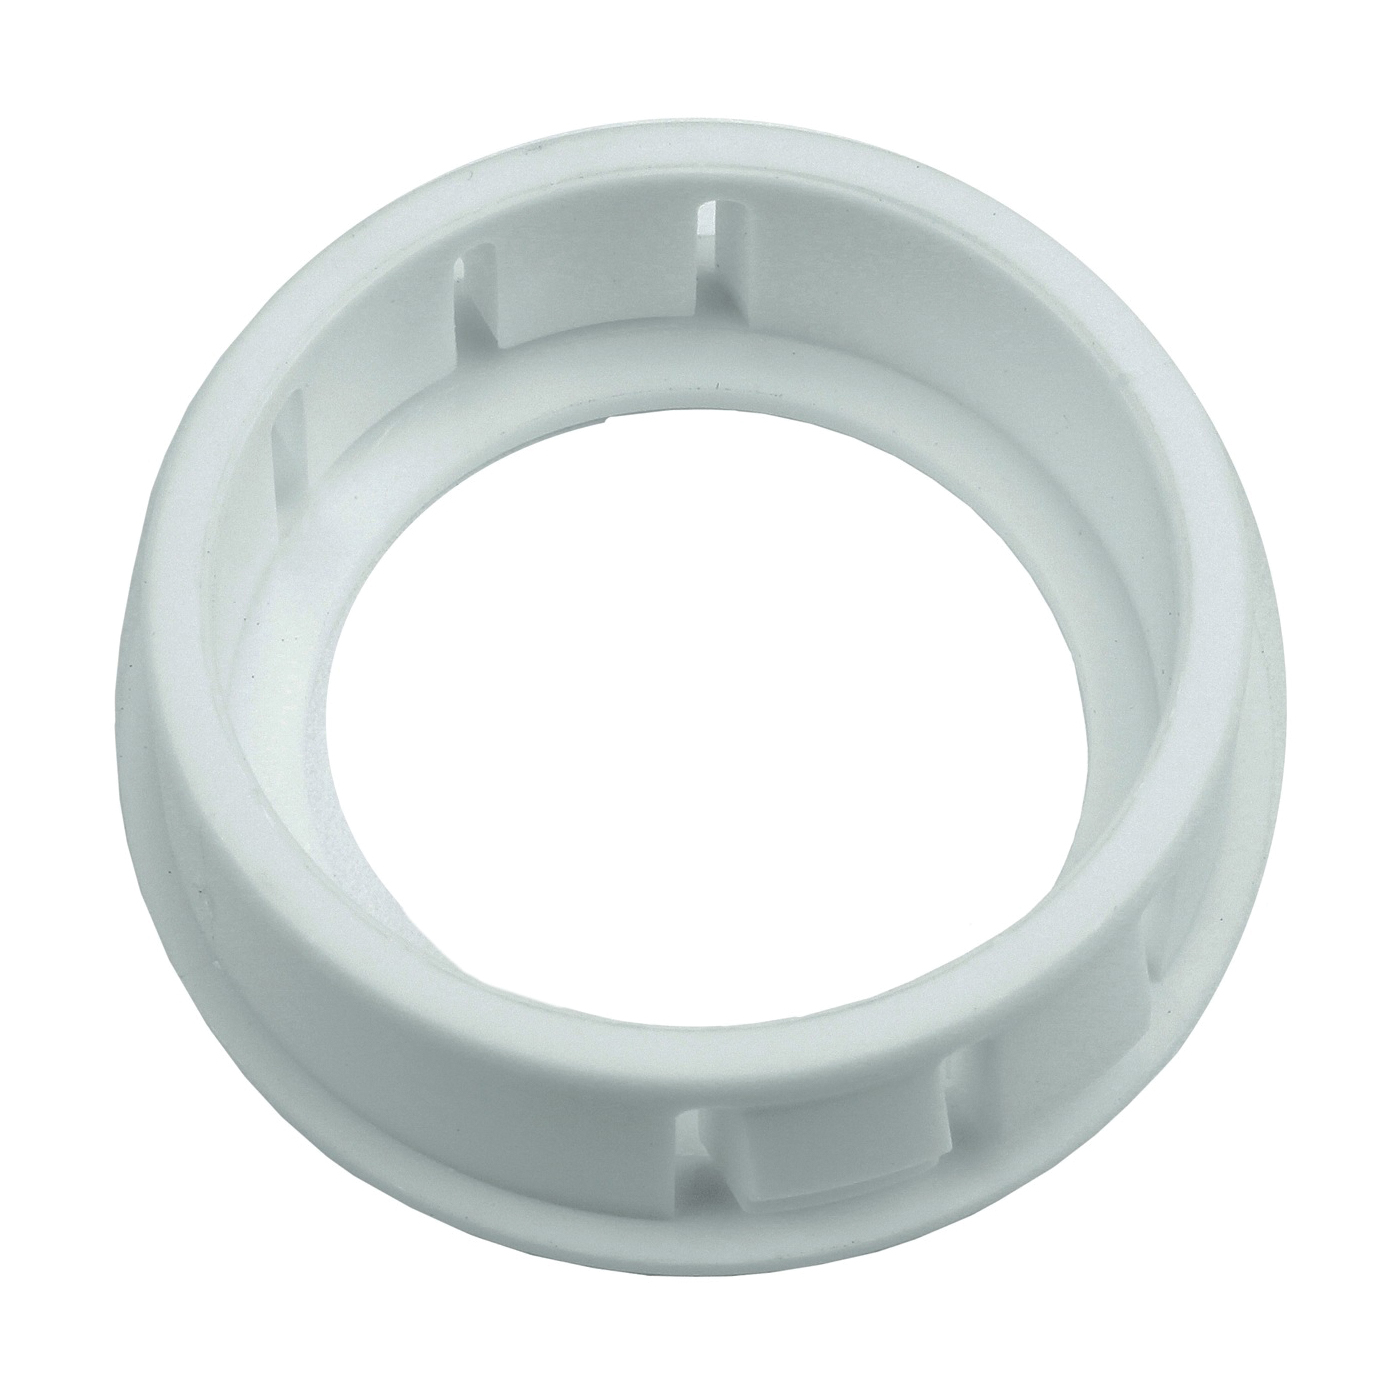 61431 Conduit Bushing, Nylon, White, 1 in Dia Panel Hole, 0.453 in Thick Panel